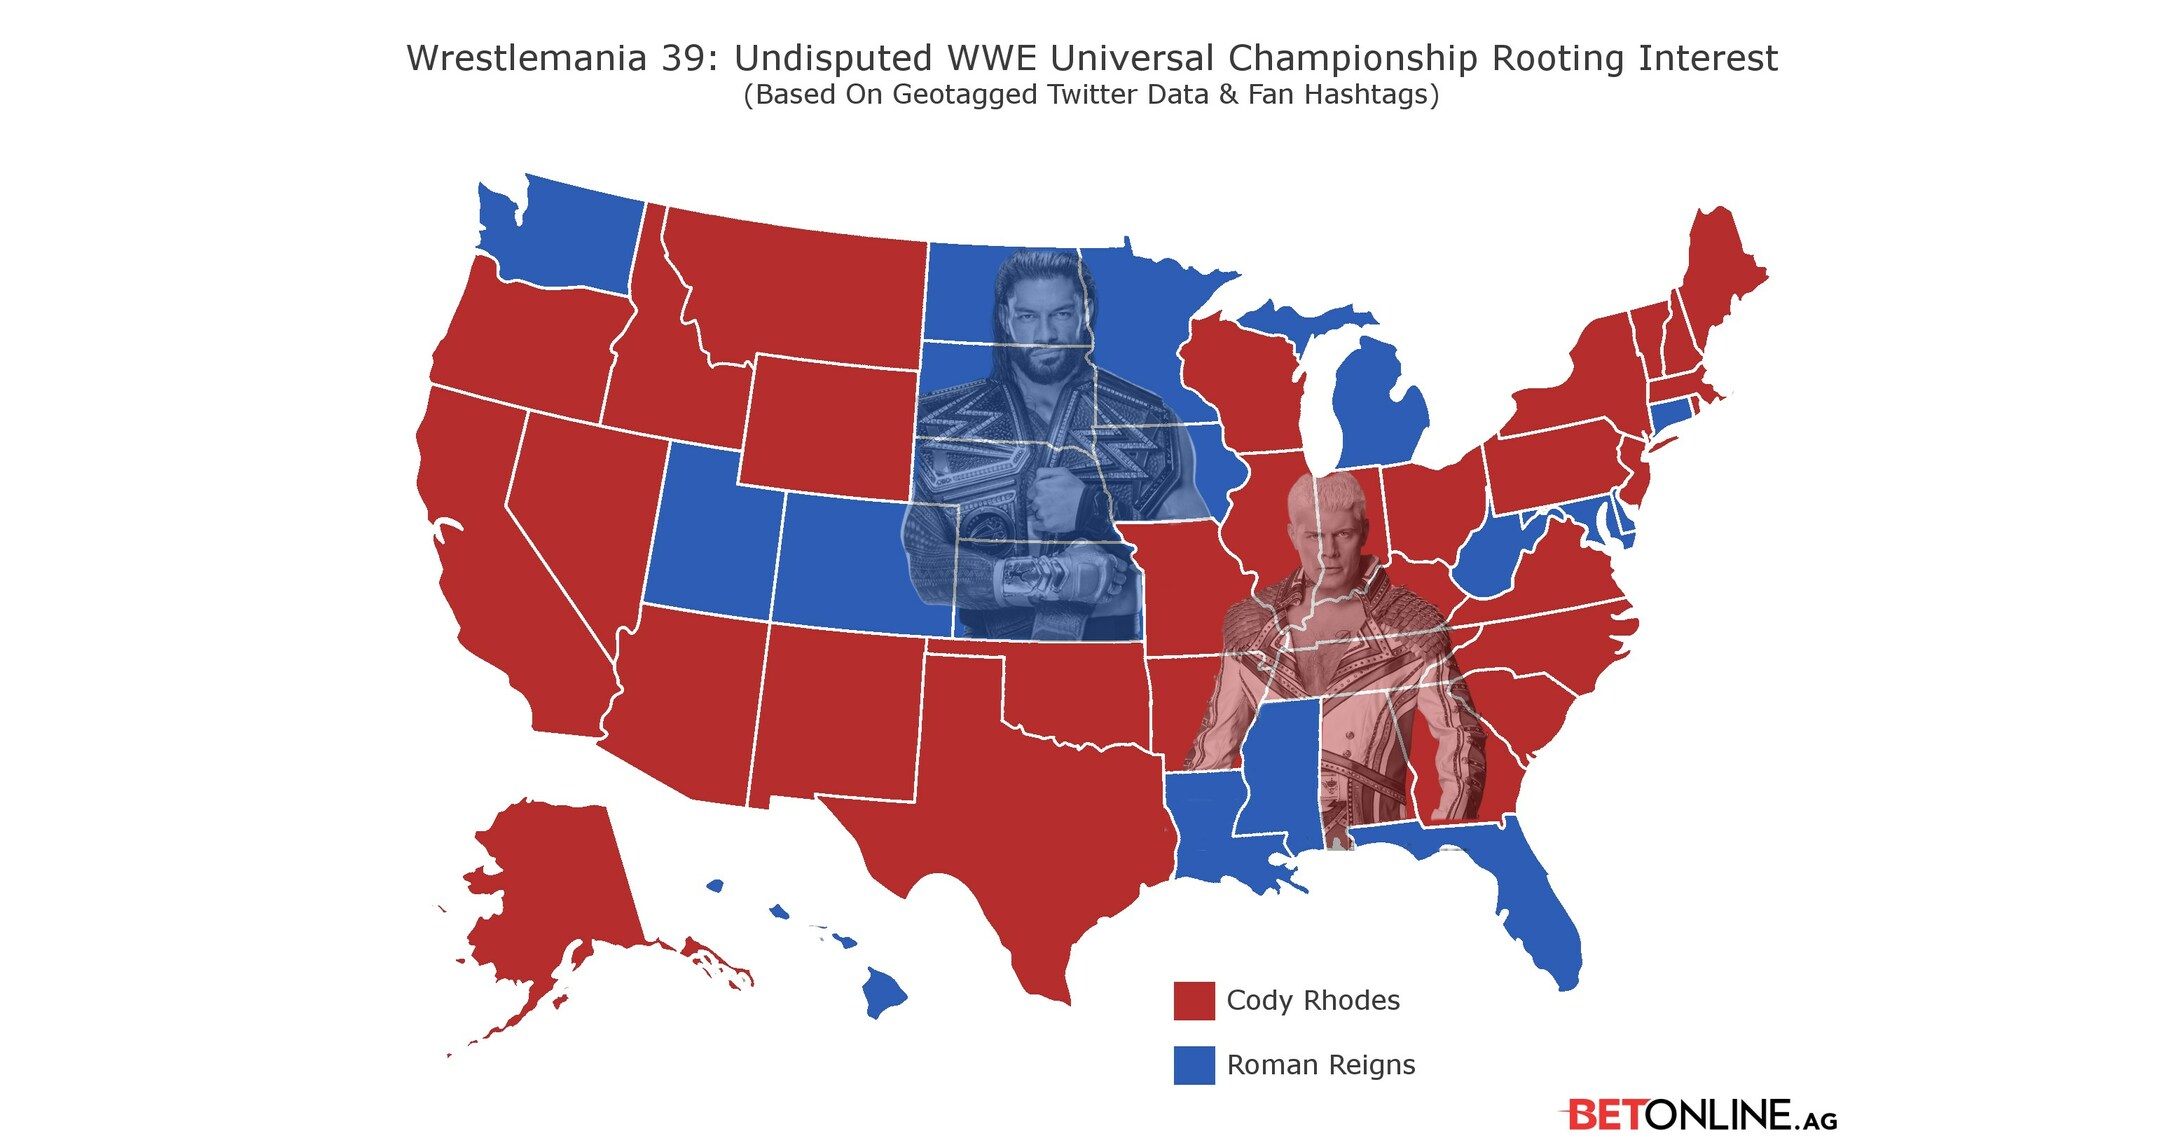 WWE Wrestlemania 39 Betting Odds Are Available to Fans in the United States